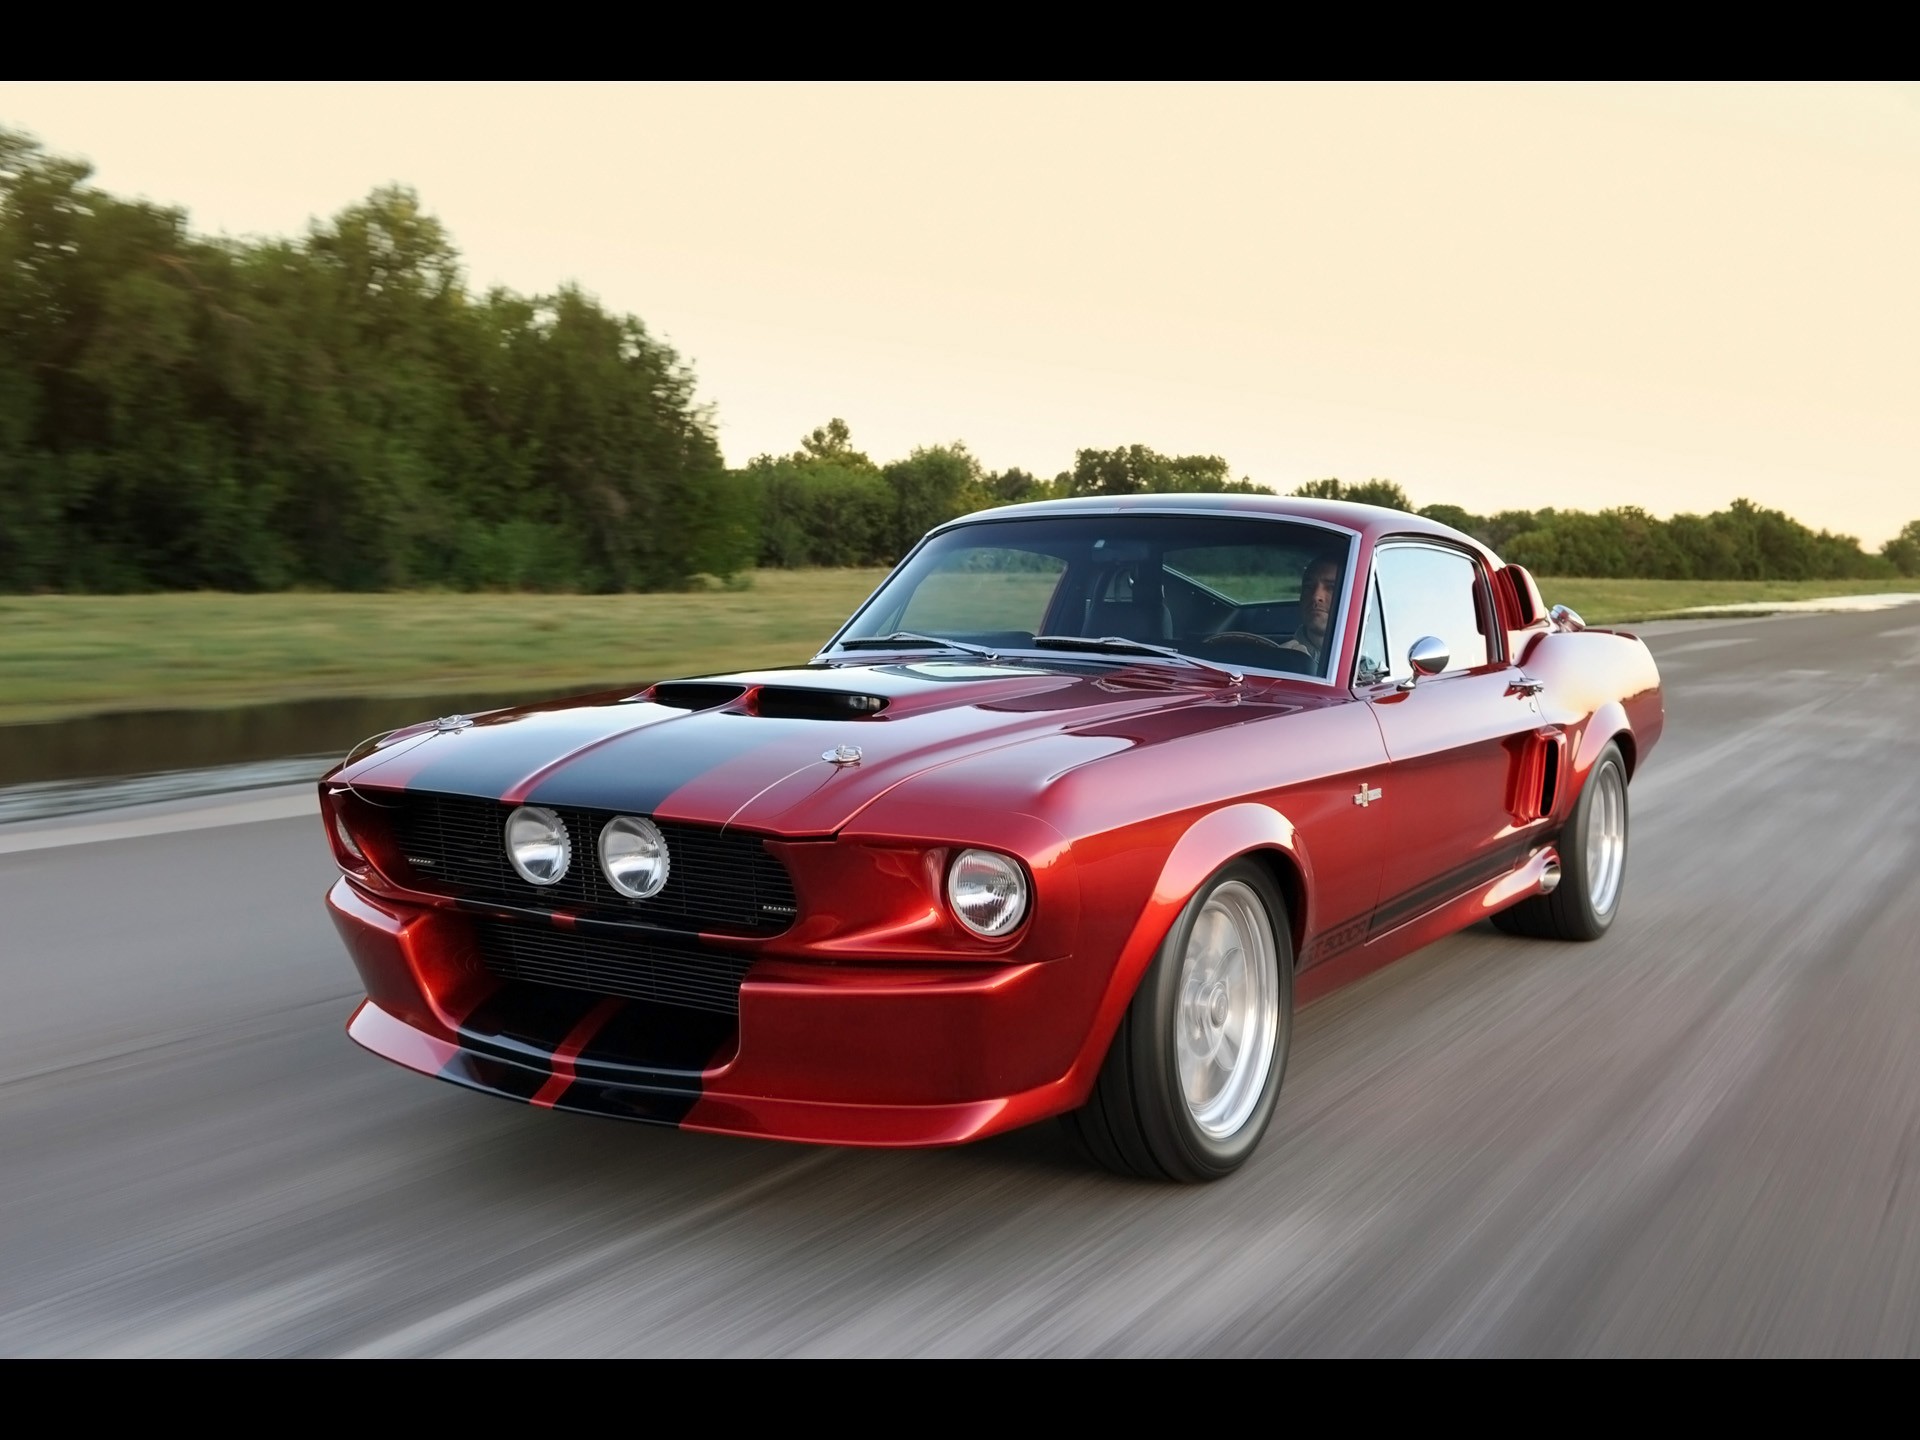 Wallpaper - 68 Ford Mustang Shelby Gt500 Red - HD Wallpaper 